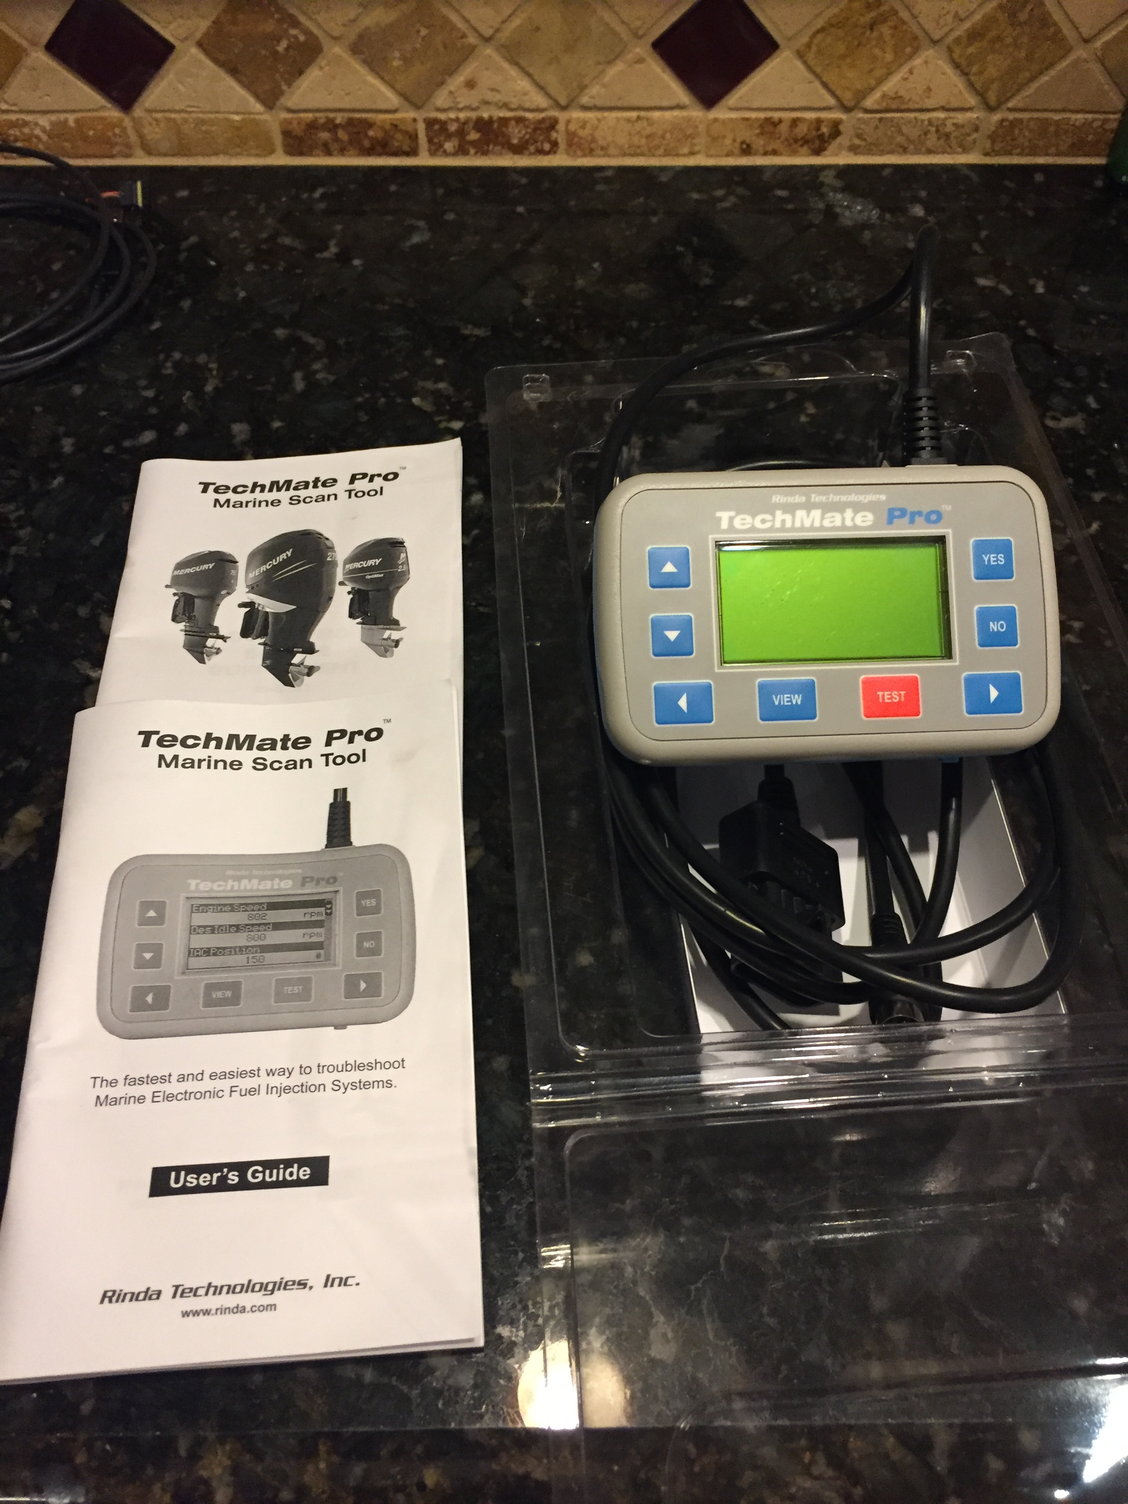 TechMate Pro scan tool - Offshoreonly.com